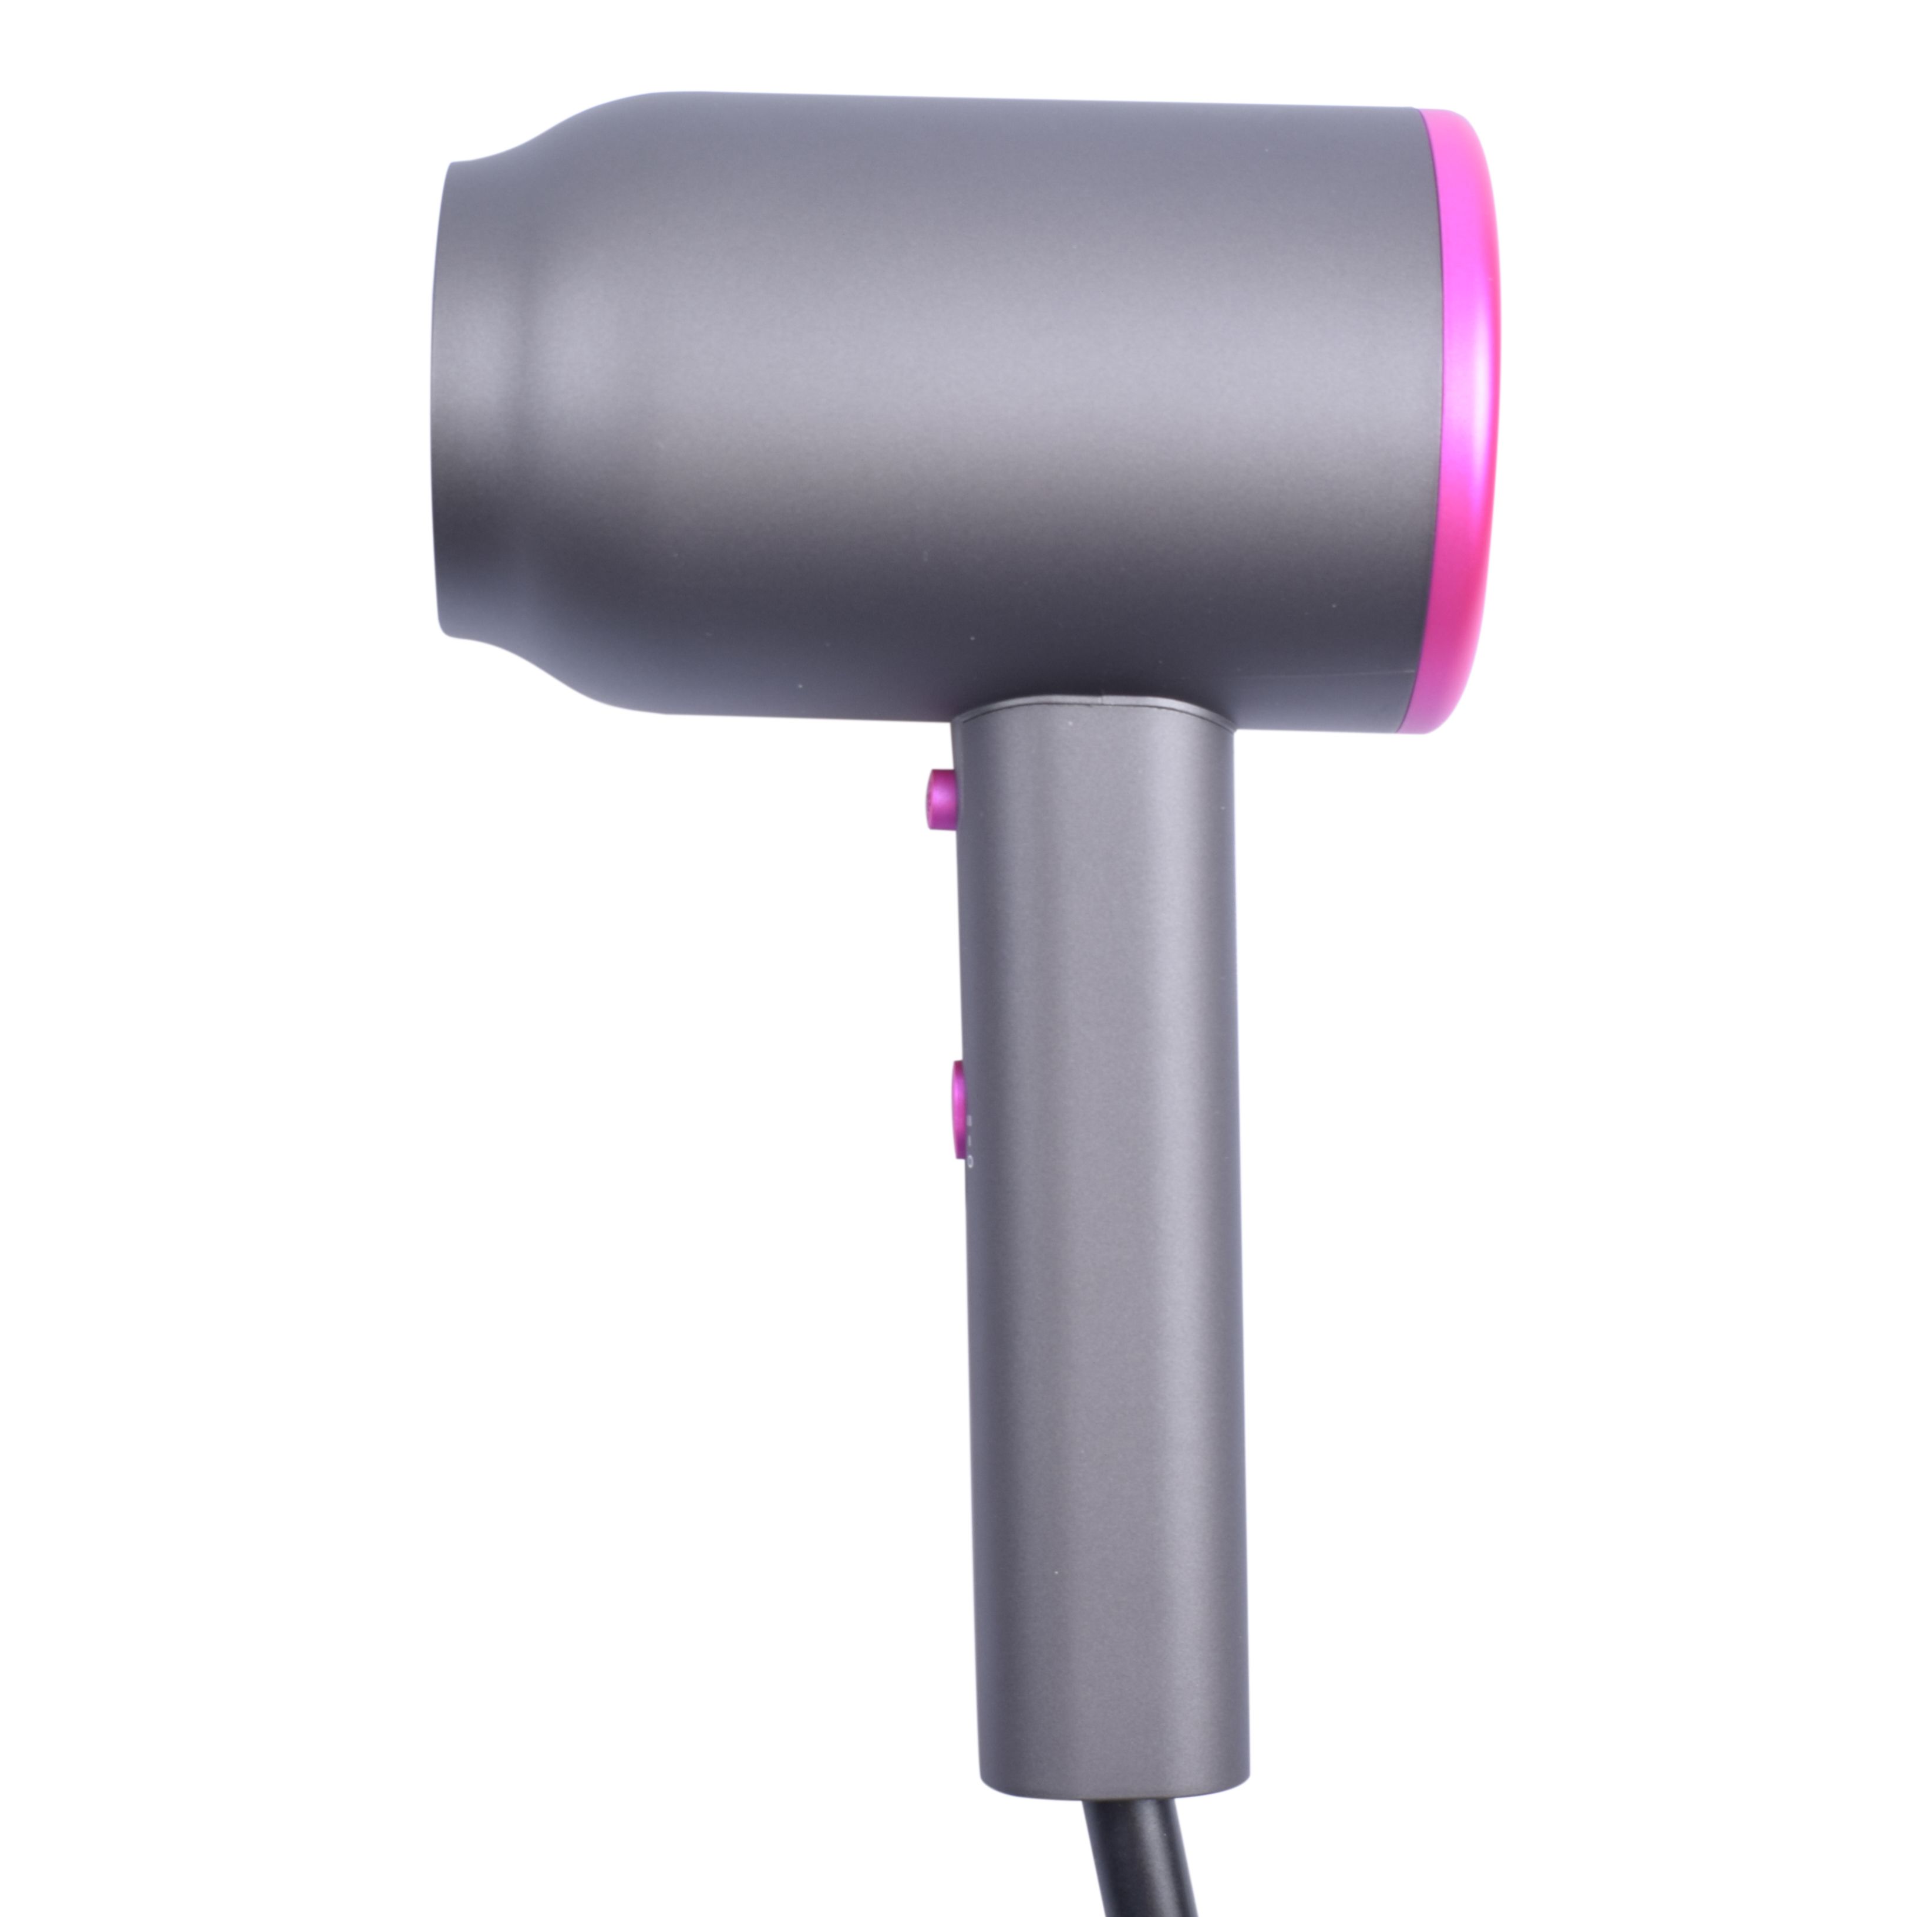 Professional Salon Hair Dryer Quick Drying hot air strong Wind blow dryer negative lonic hammer with low noise